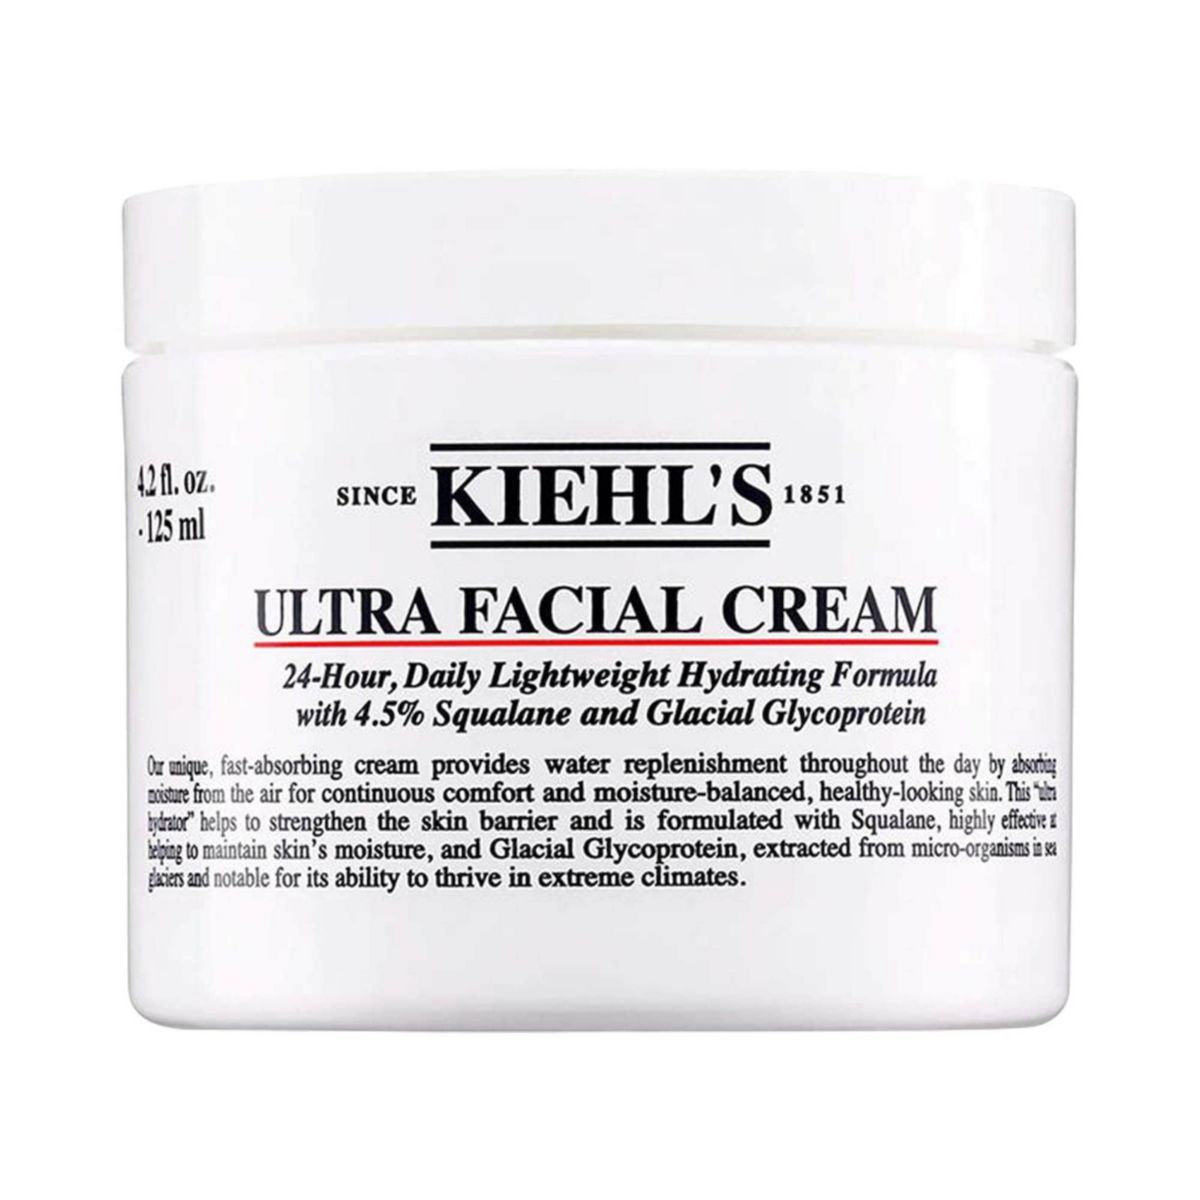 Kiehl's Since 1851 Ultra Facial Refillable Moisturizing Cream with Squalane Kiehl's Since 1851